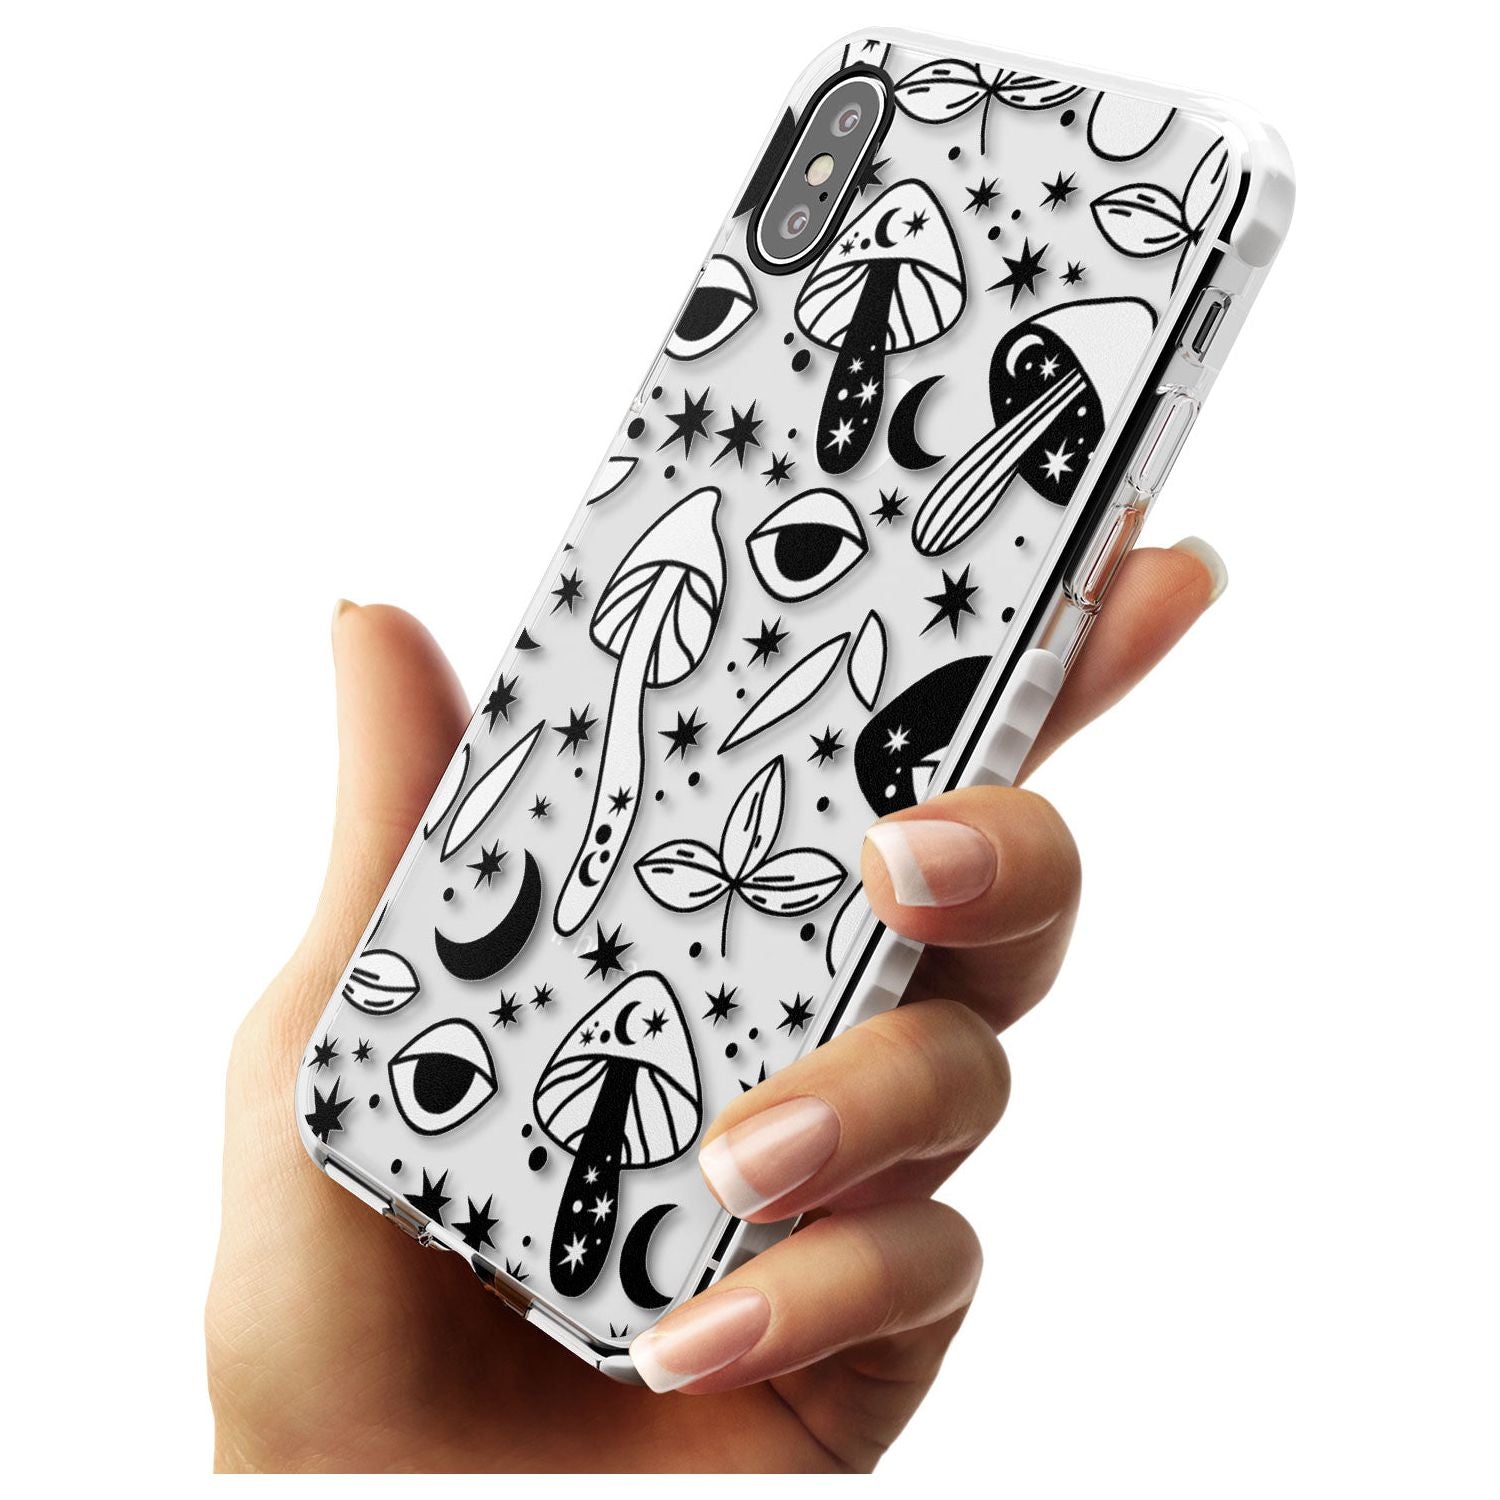 Psychedelic Mushrooms Pattern Impact Phone Case for iPhone X XS Max XR